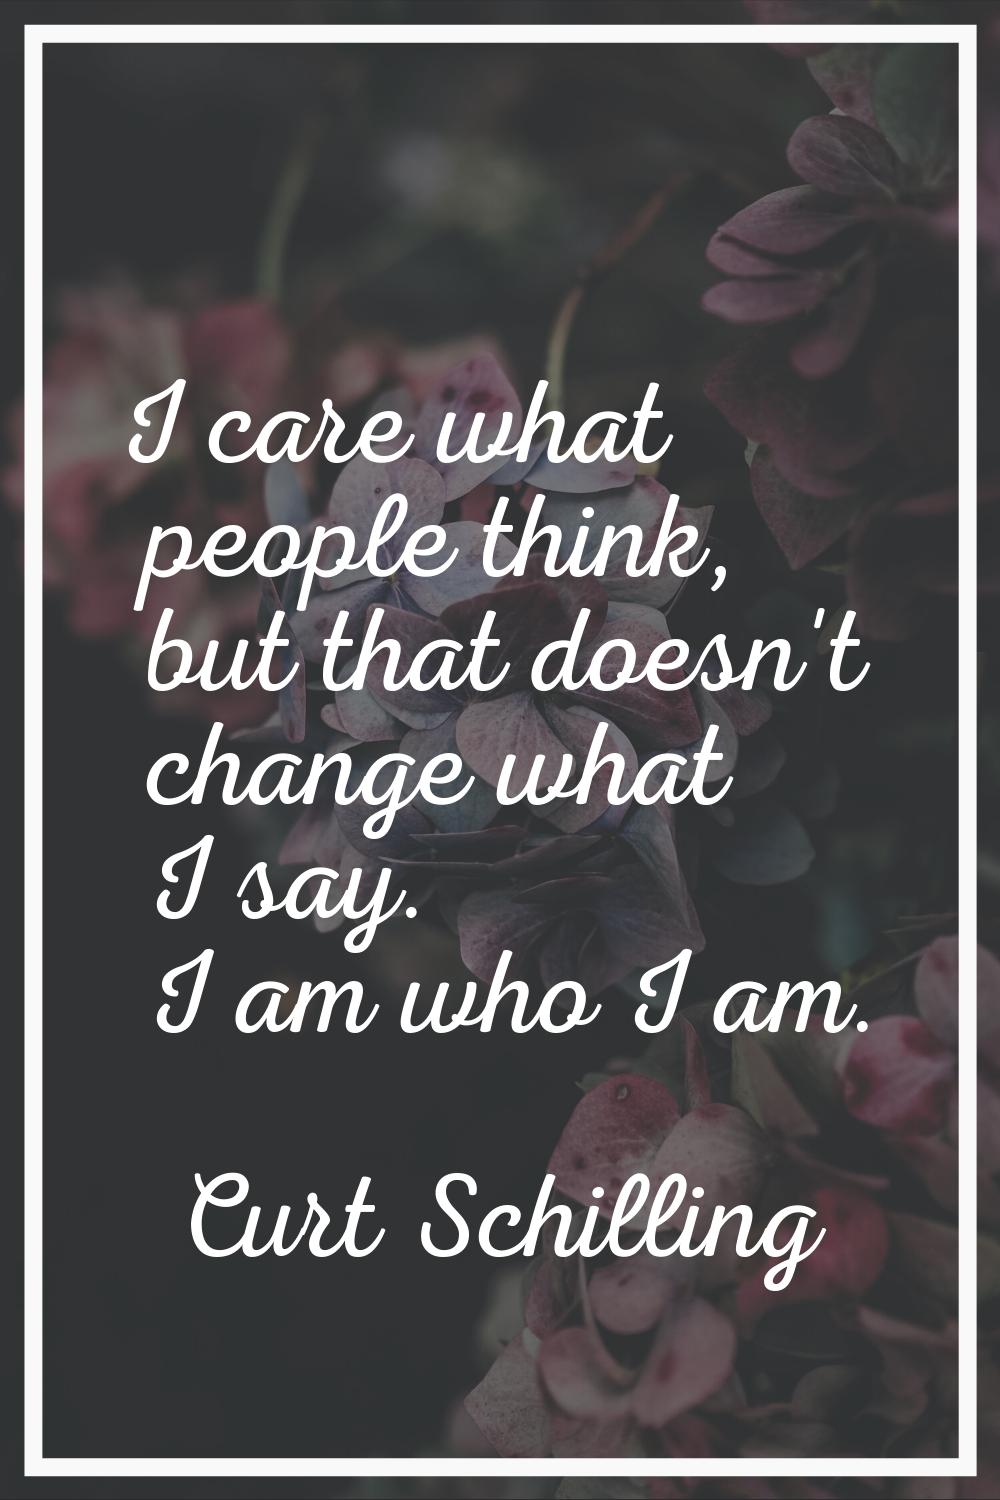 I care what people think, but that doesn't change what I say. I am who I am.